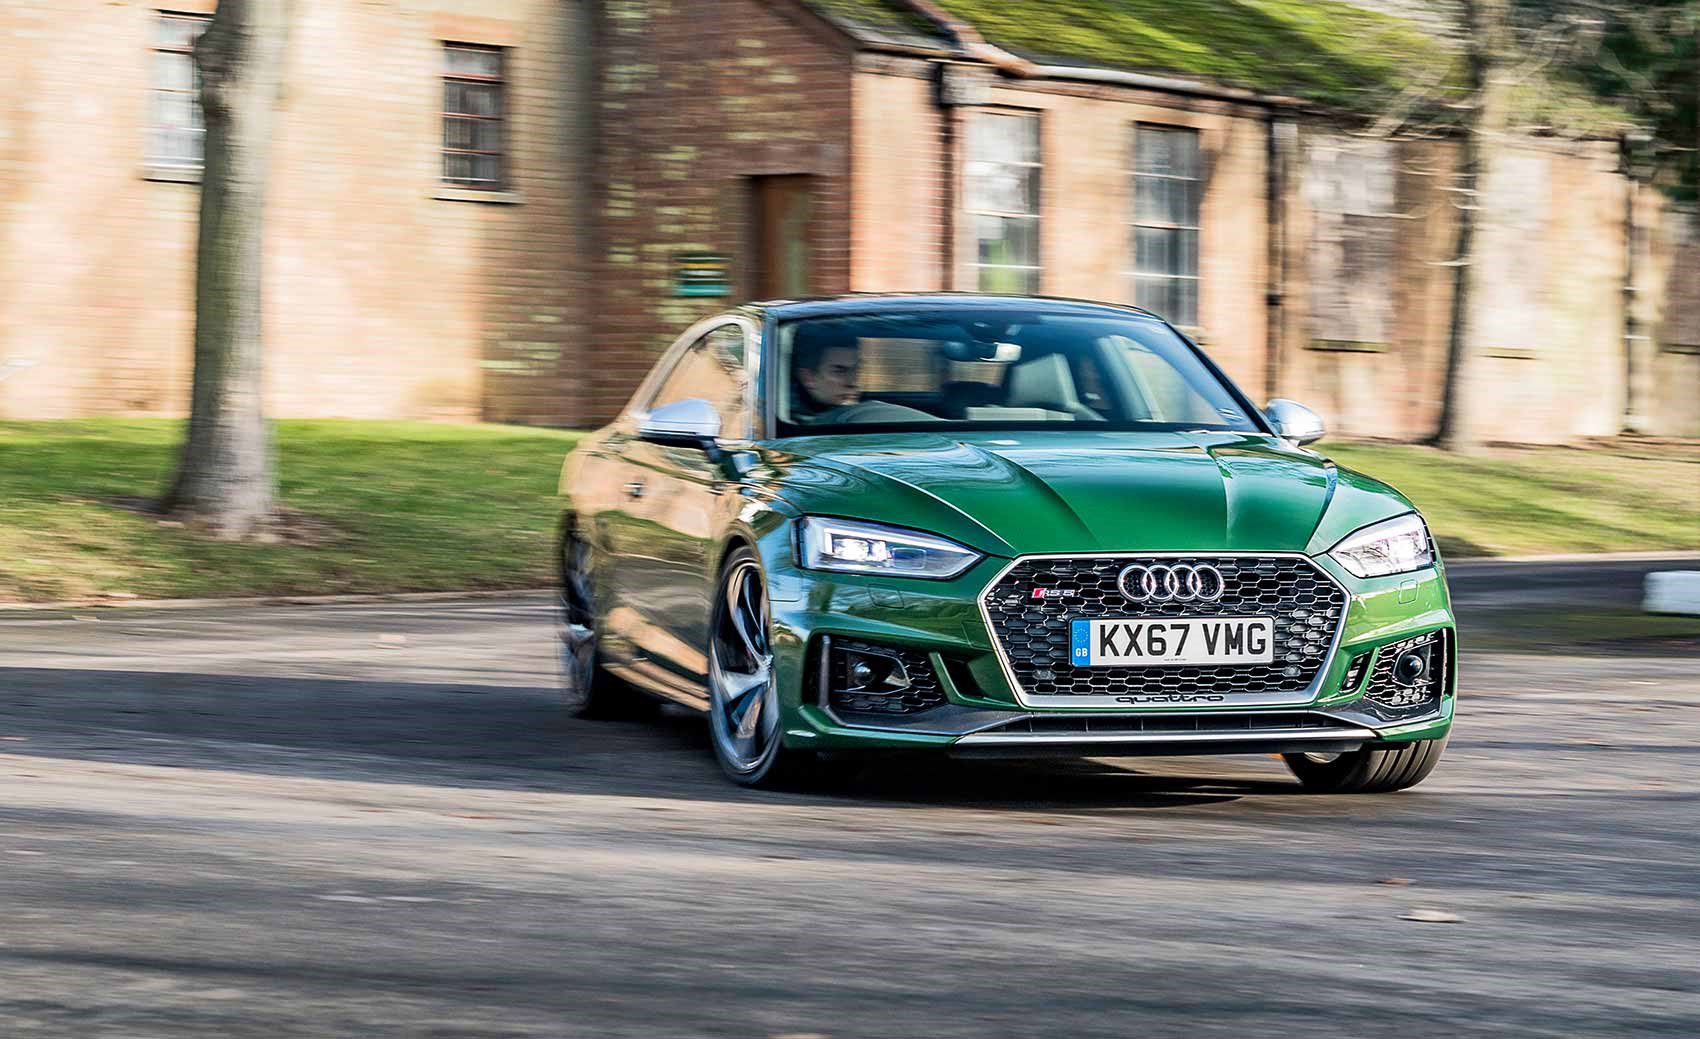 Audi RS5 Best and Worst Years